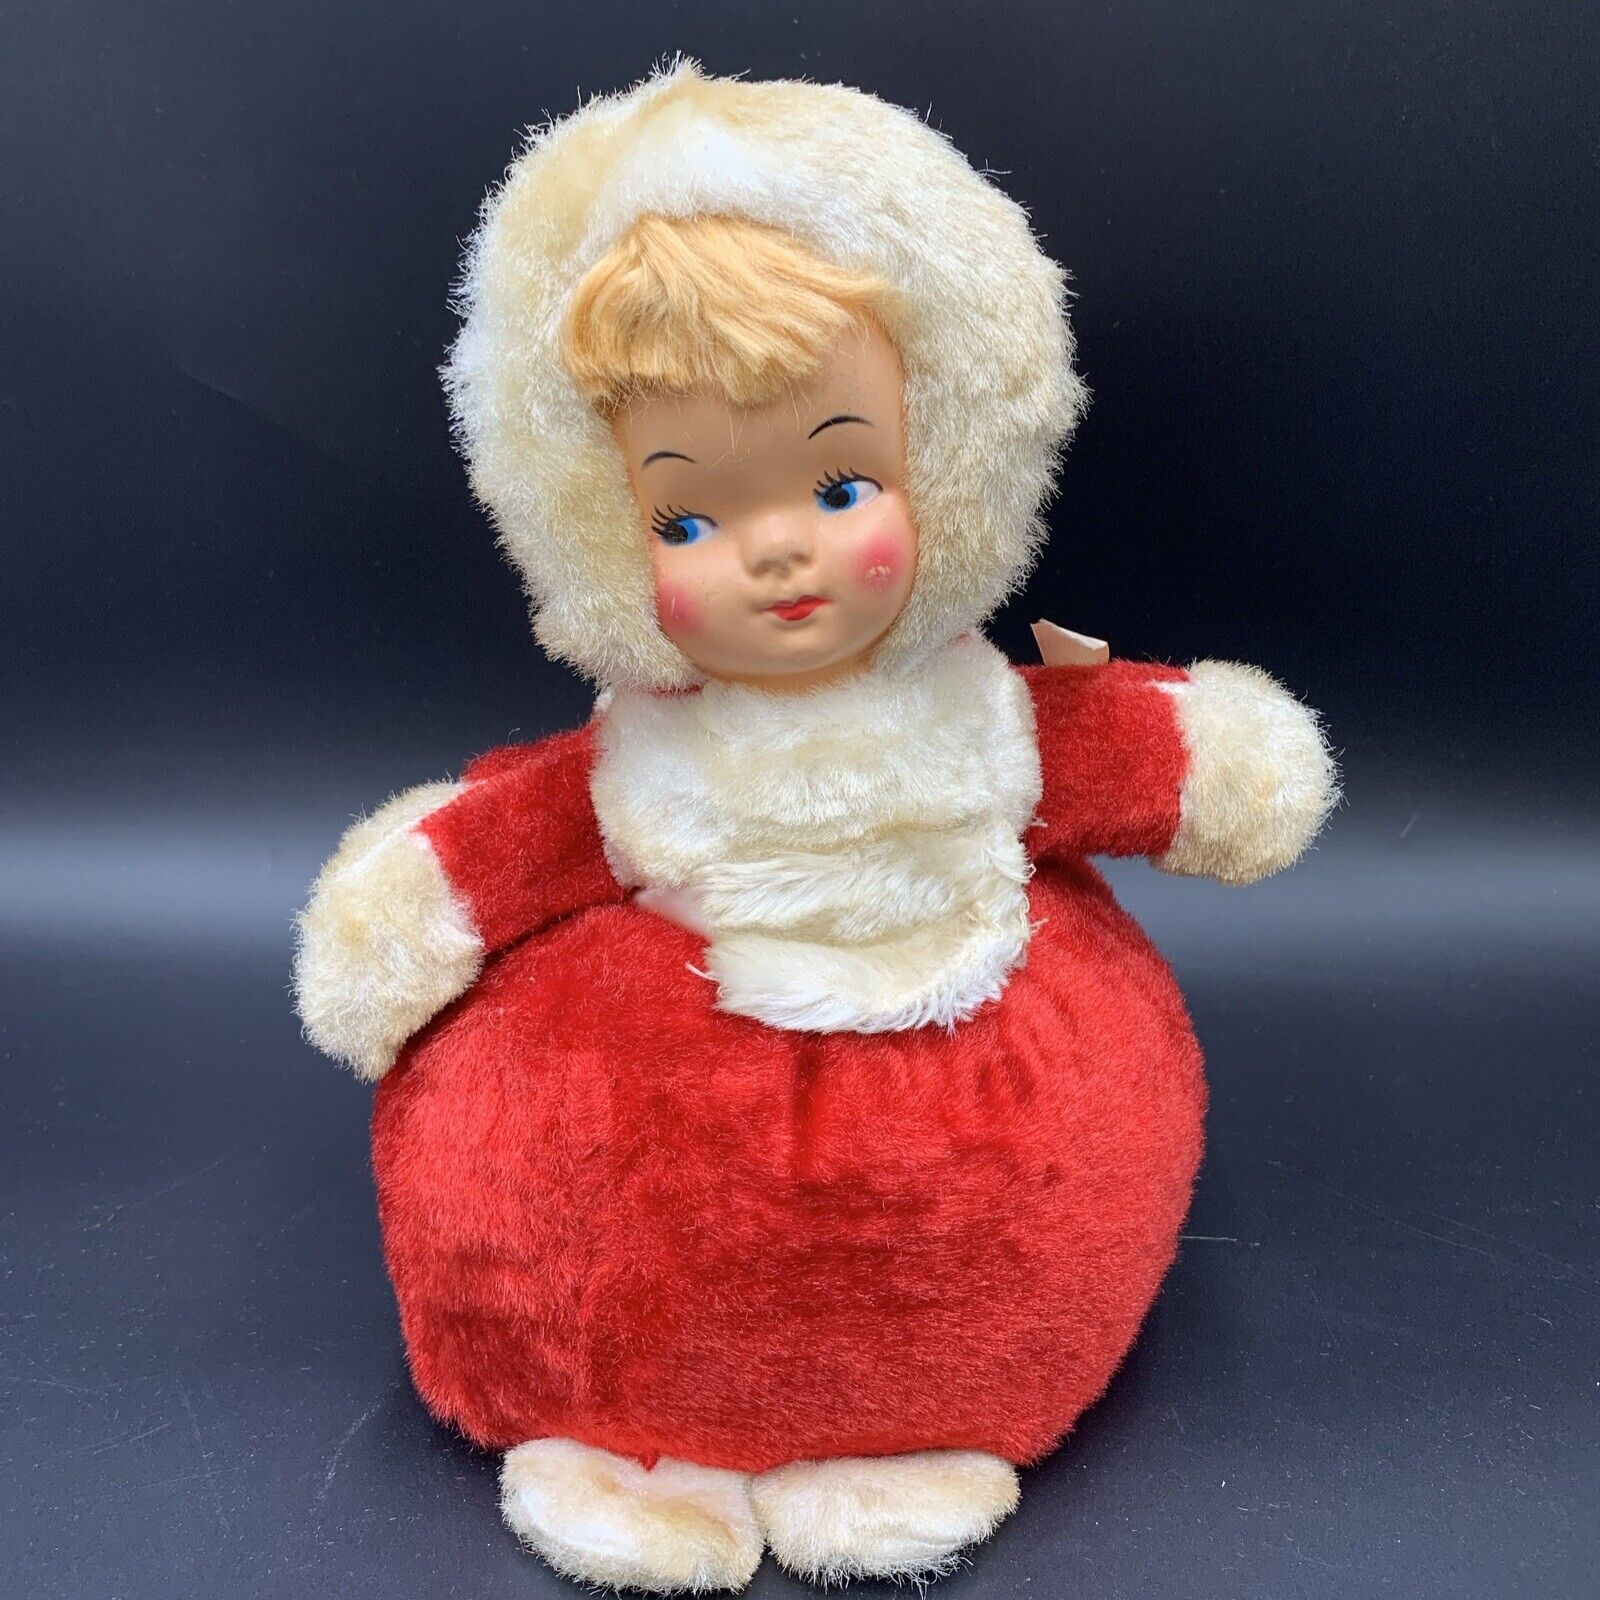 Vintage 1950s Rubber Face Style Doll with Celluloid Face Plate Red White Xmas